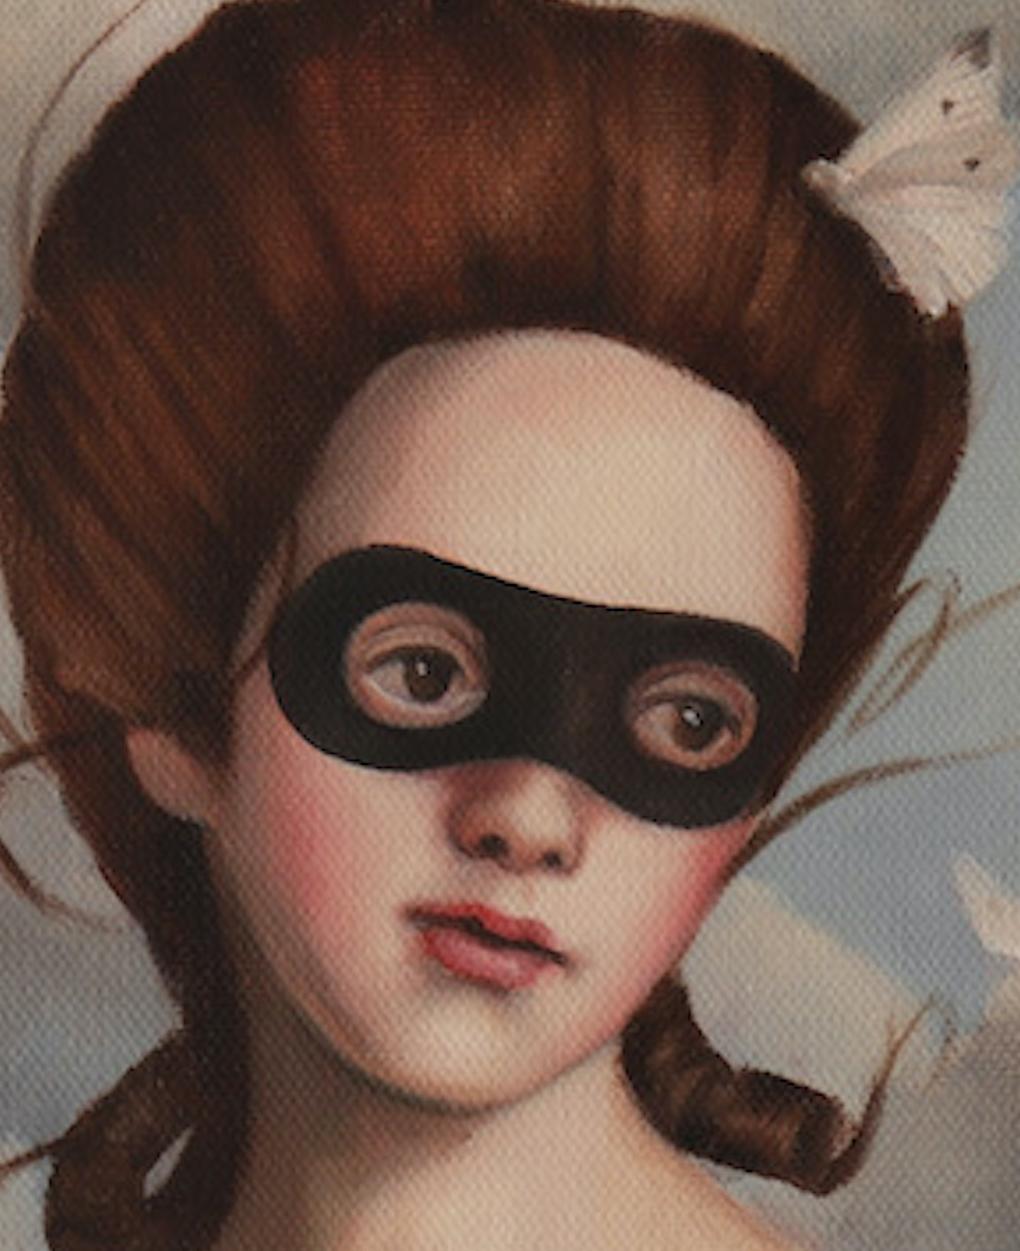 Plentiful - Oval Portrait of Masked Woman with sky background and butterflies - Painting by Penelope Boyd